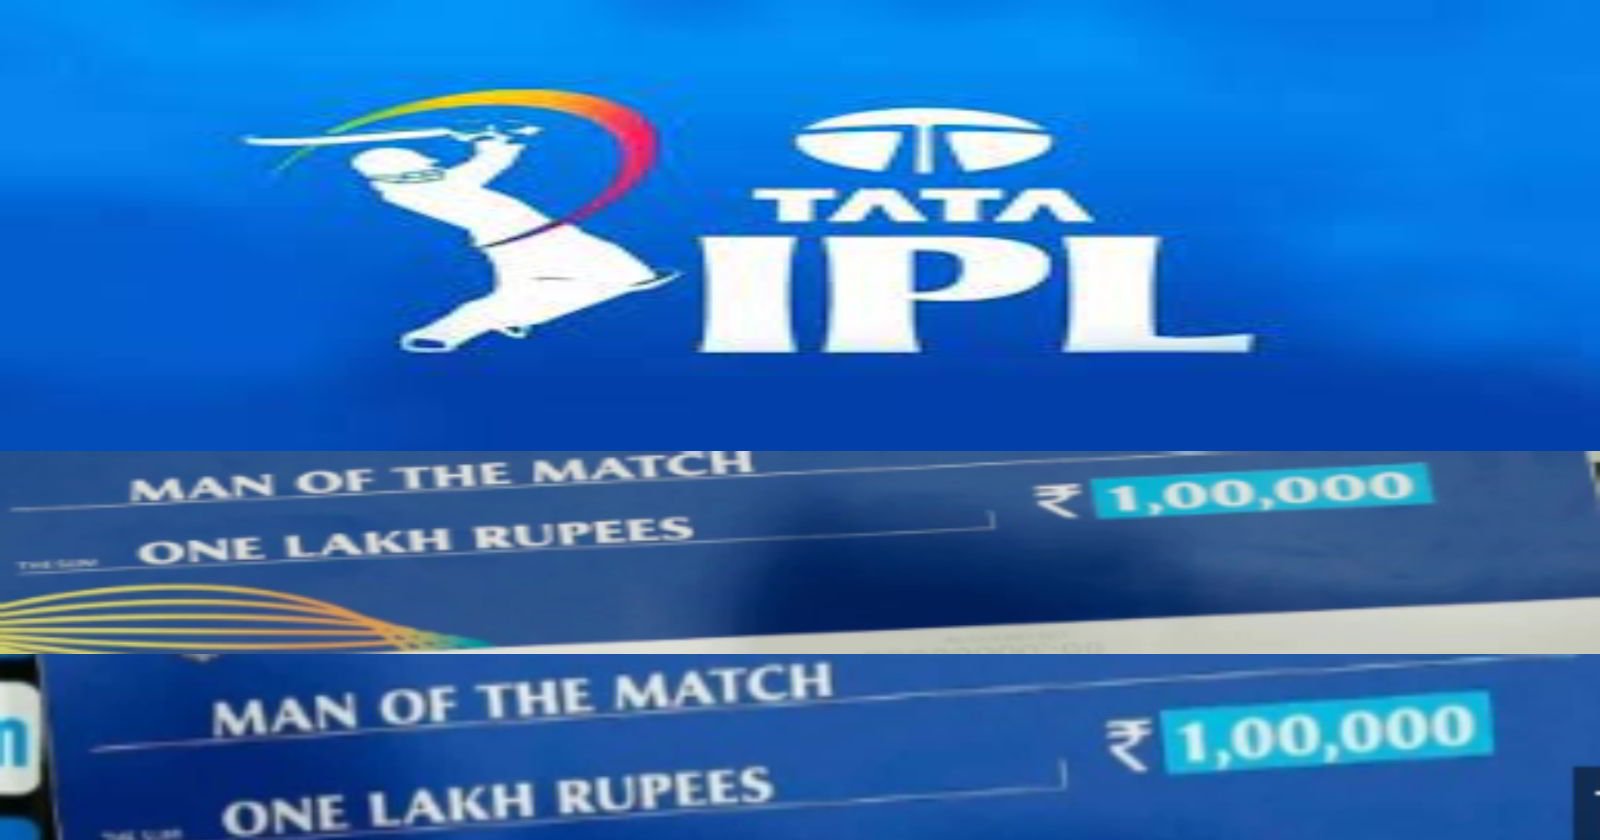 Most IPL matches without a Man of the Match award in Hindi